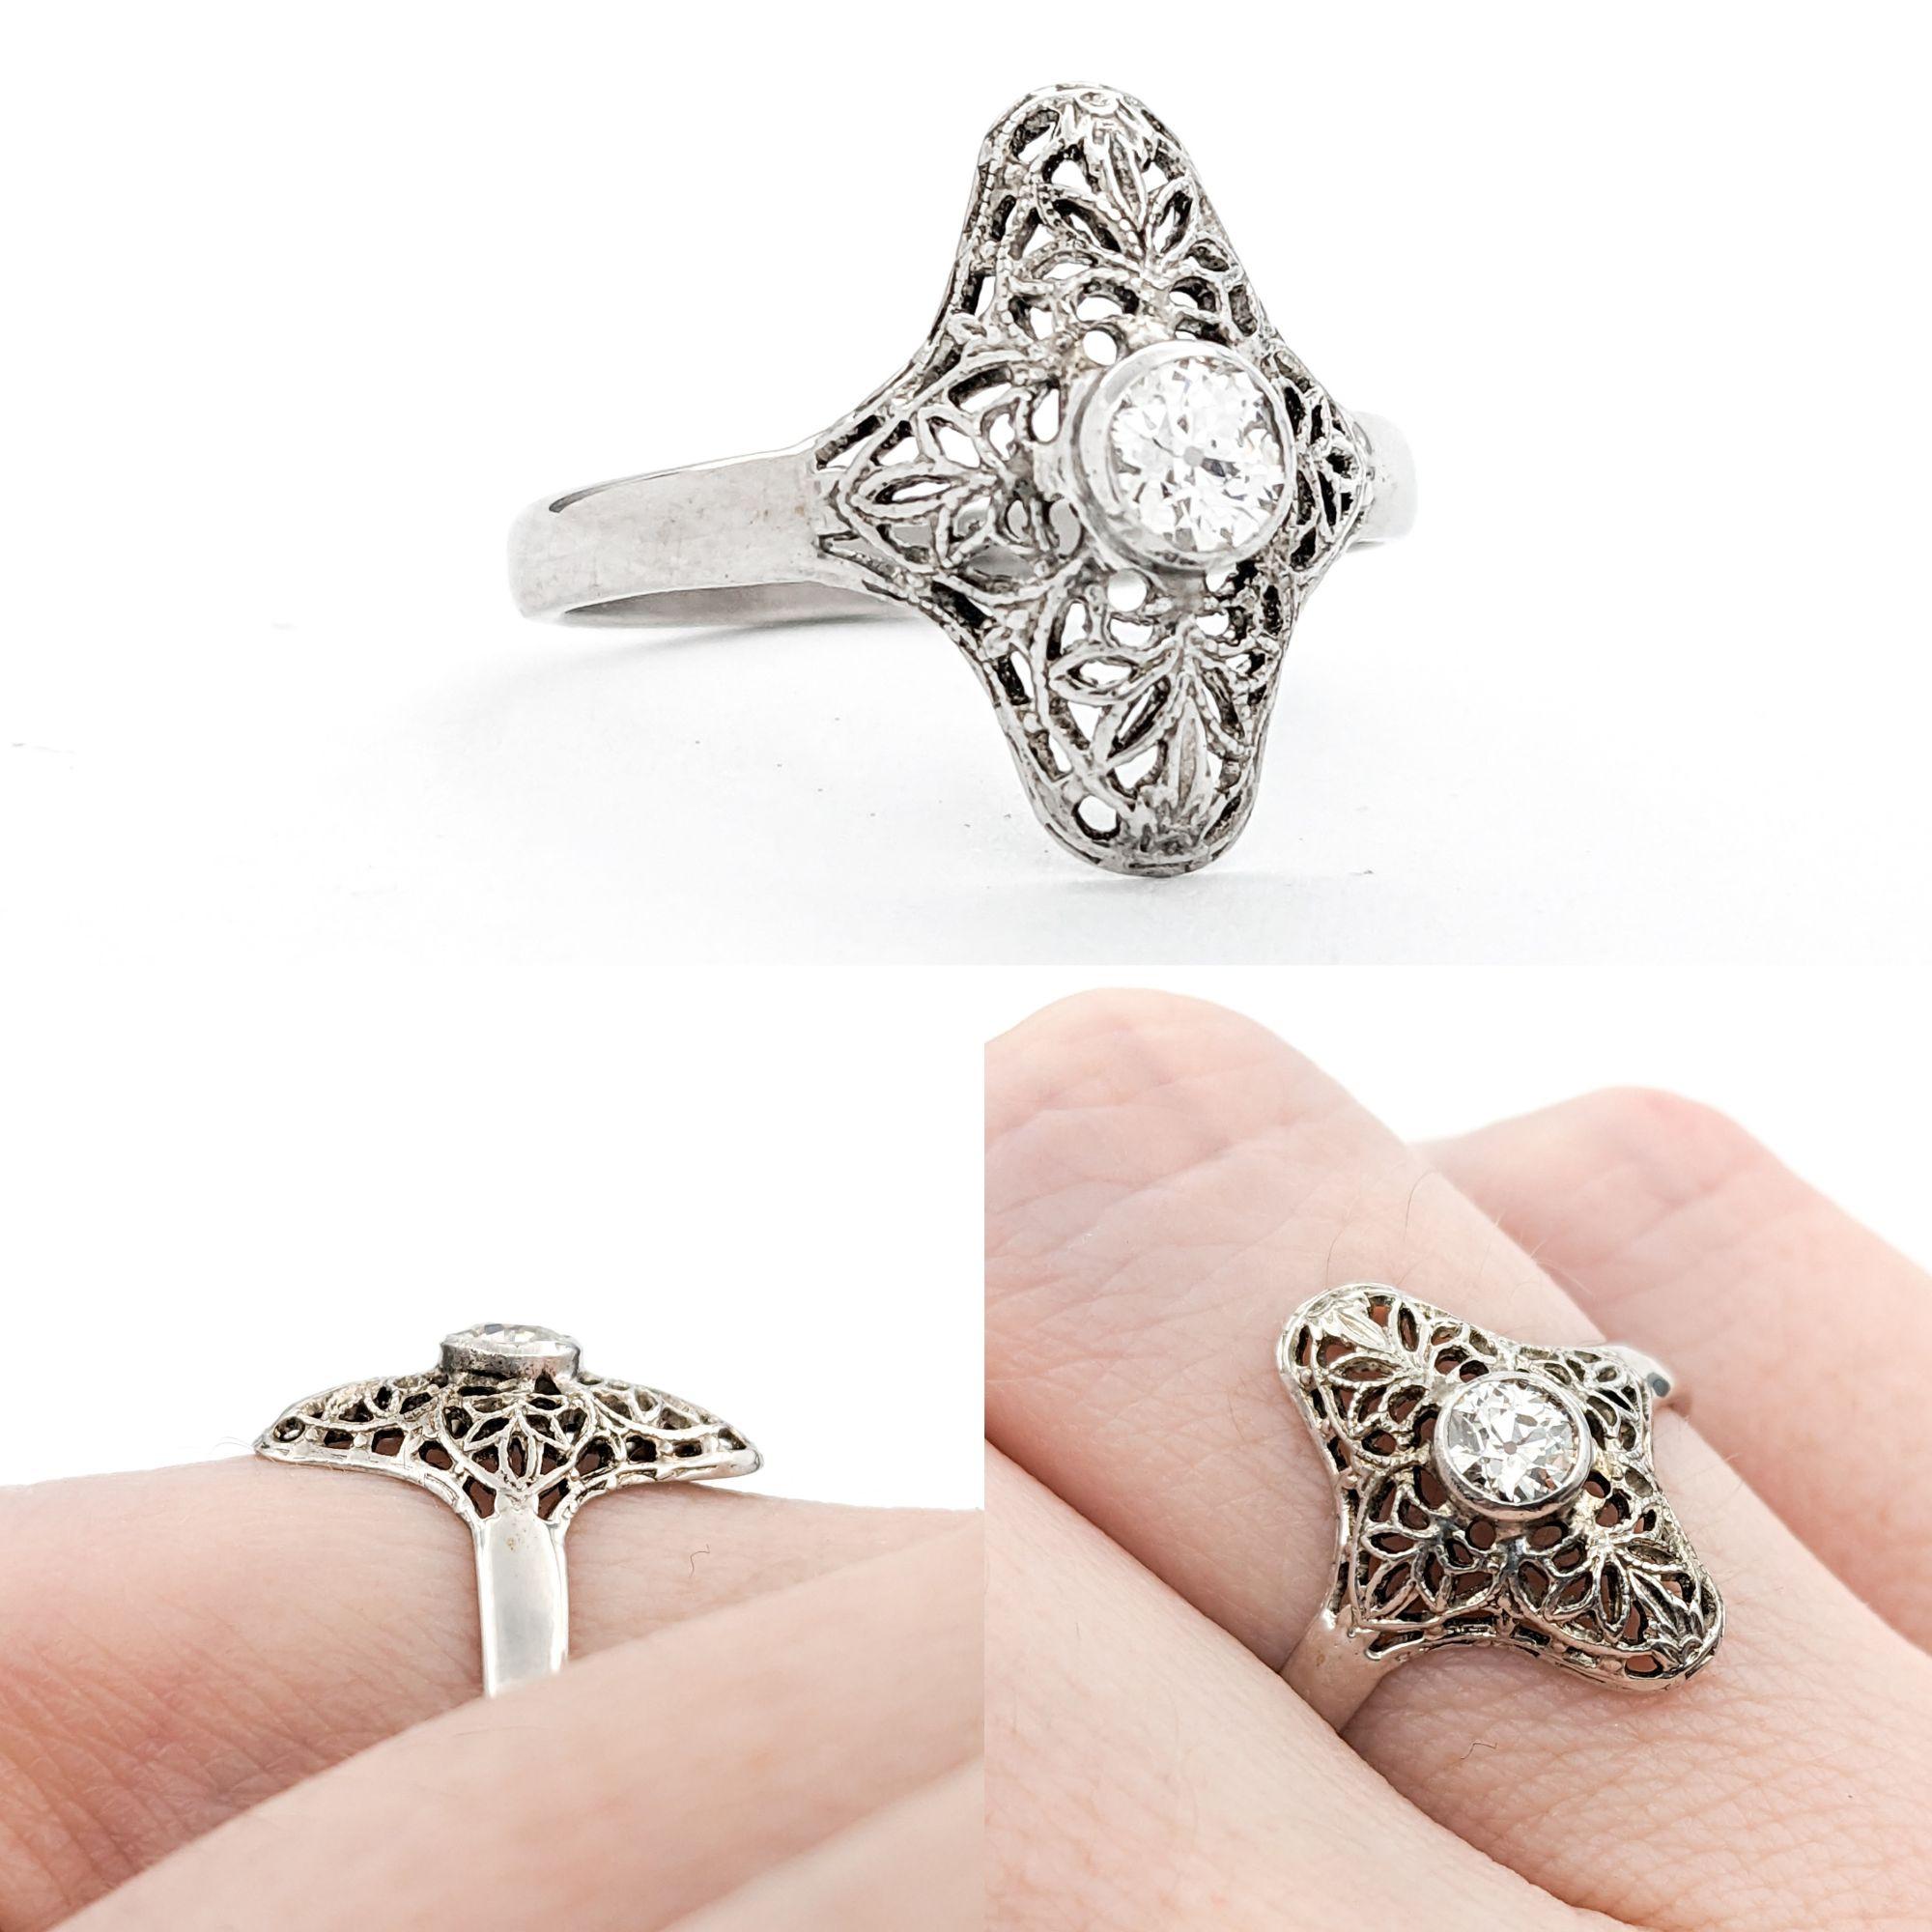 Antique Filigree Diamond Ring Art Deco Style Ring In White Gold For Sale 1